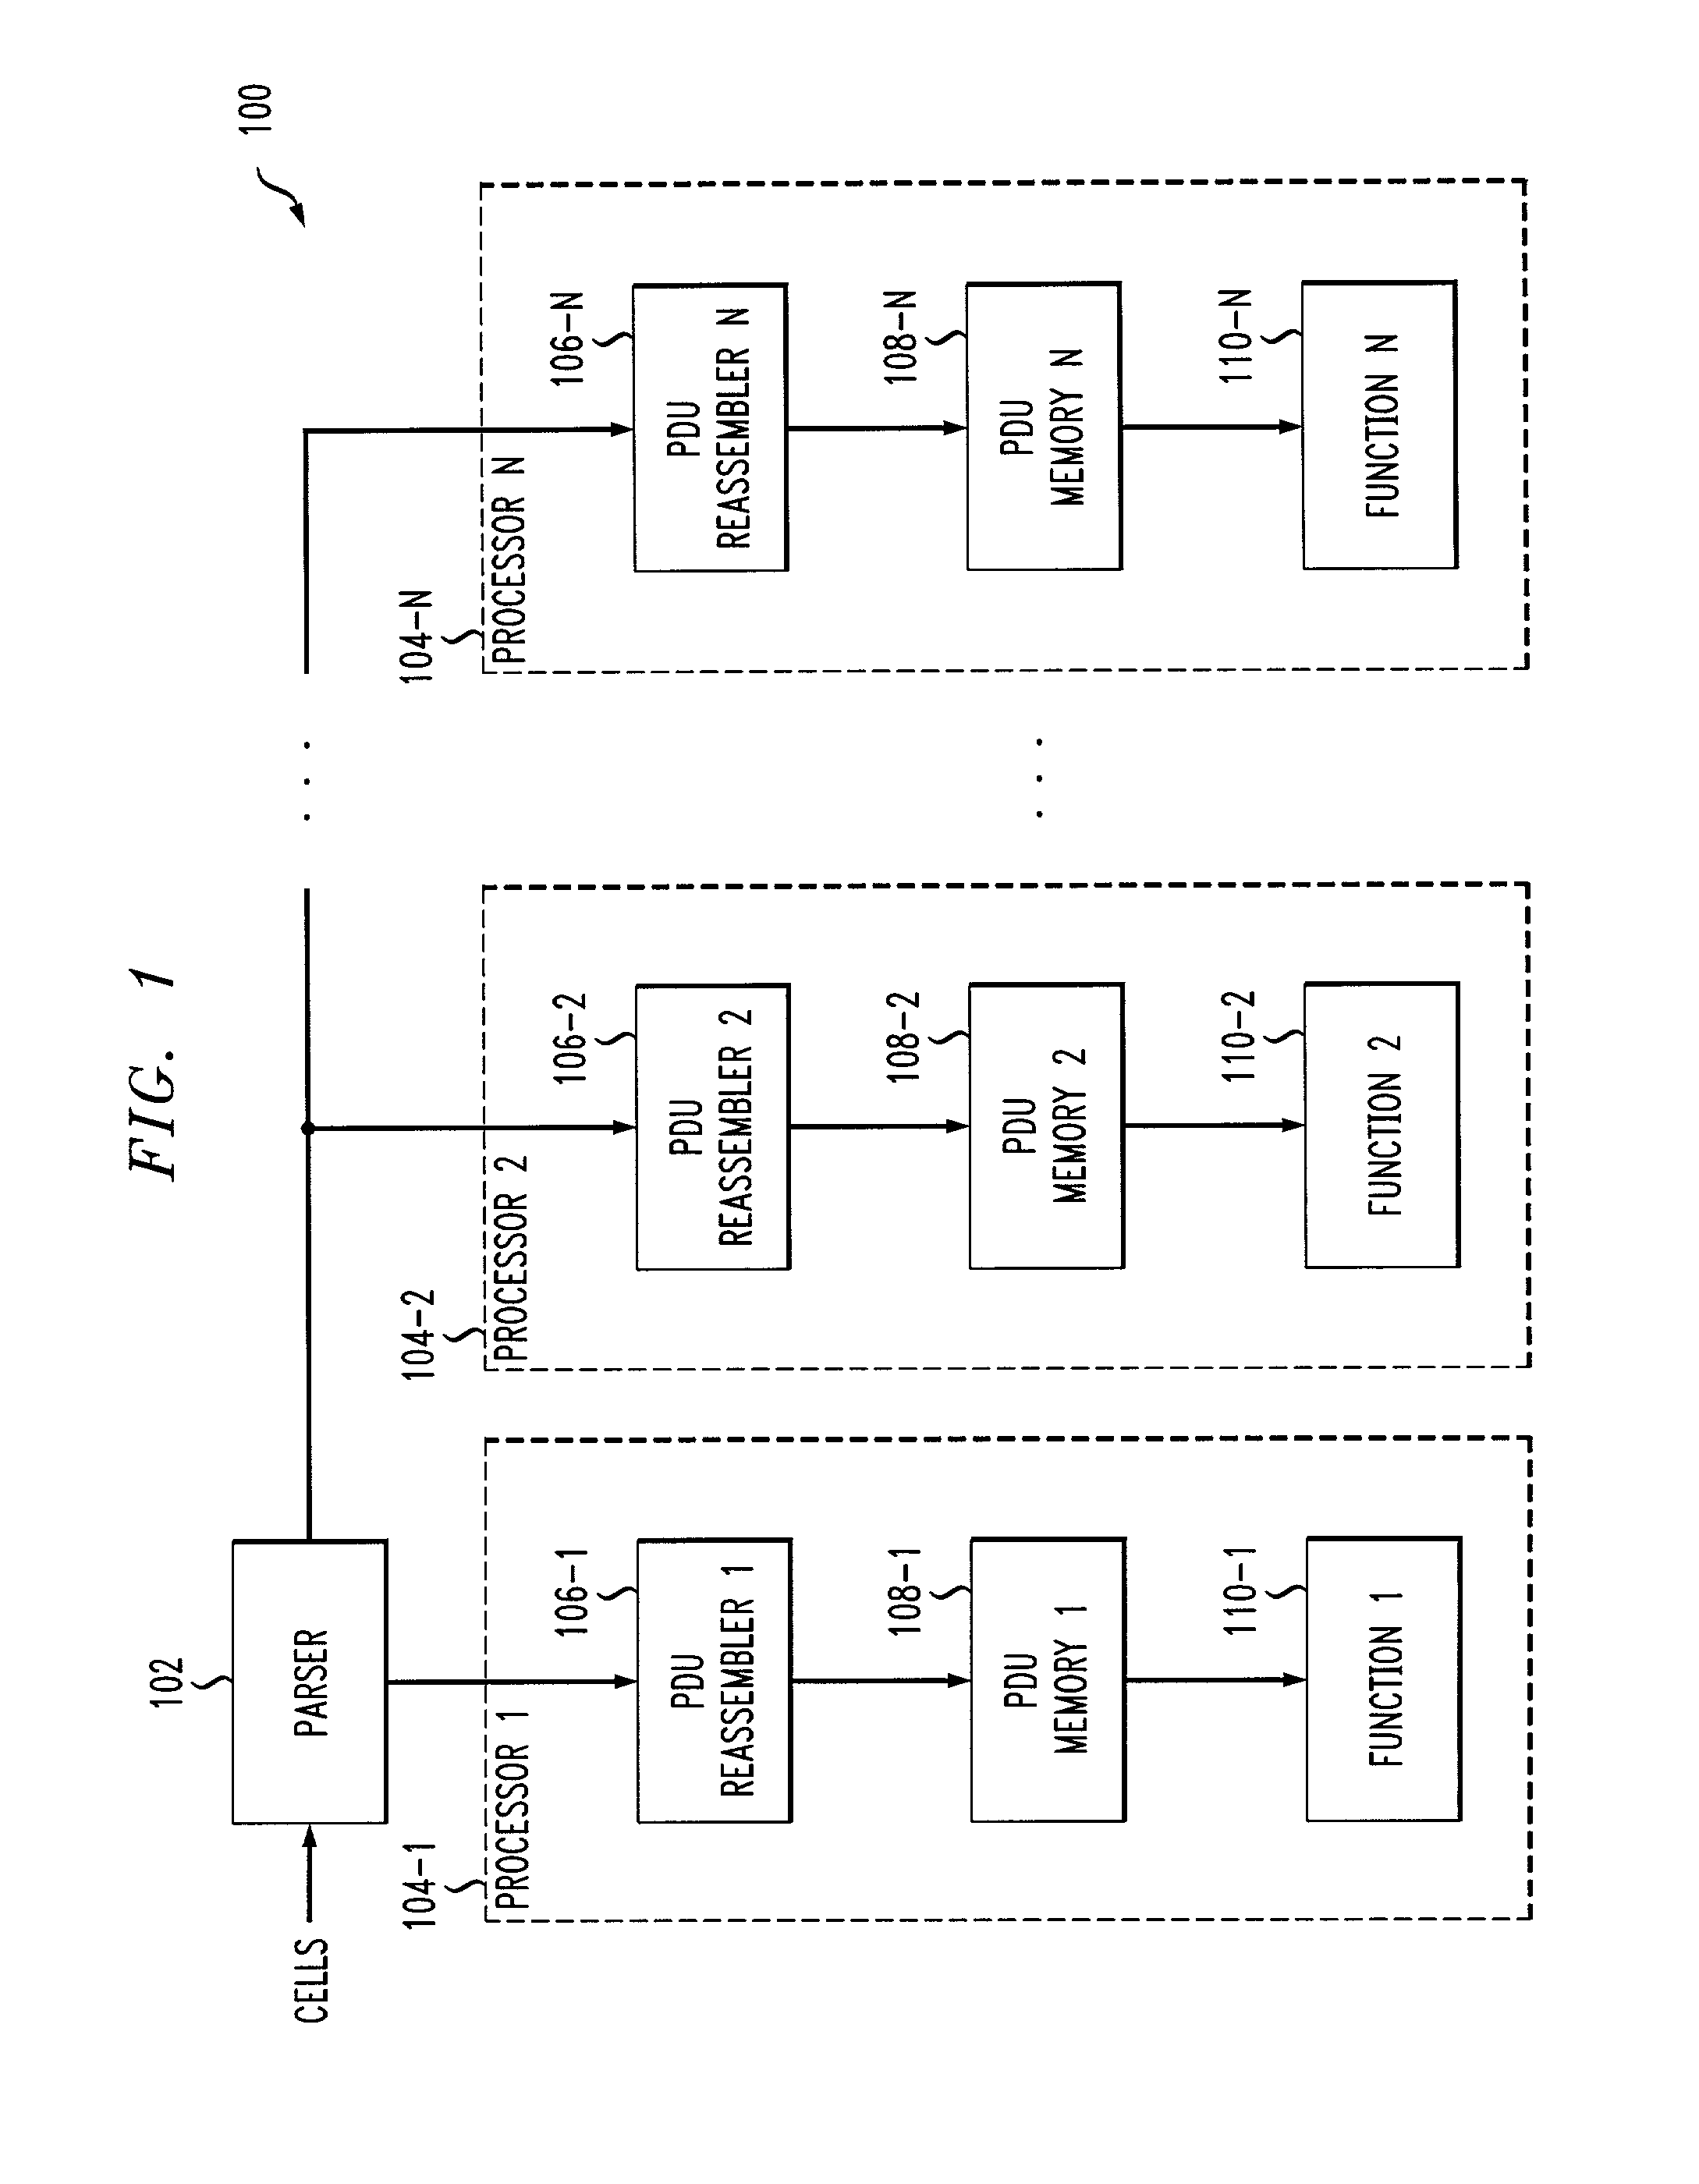 Methods and apparatus for using multiple reassembly memories for performing multiple functions